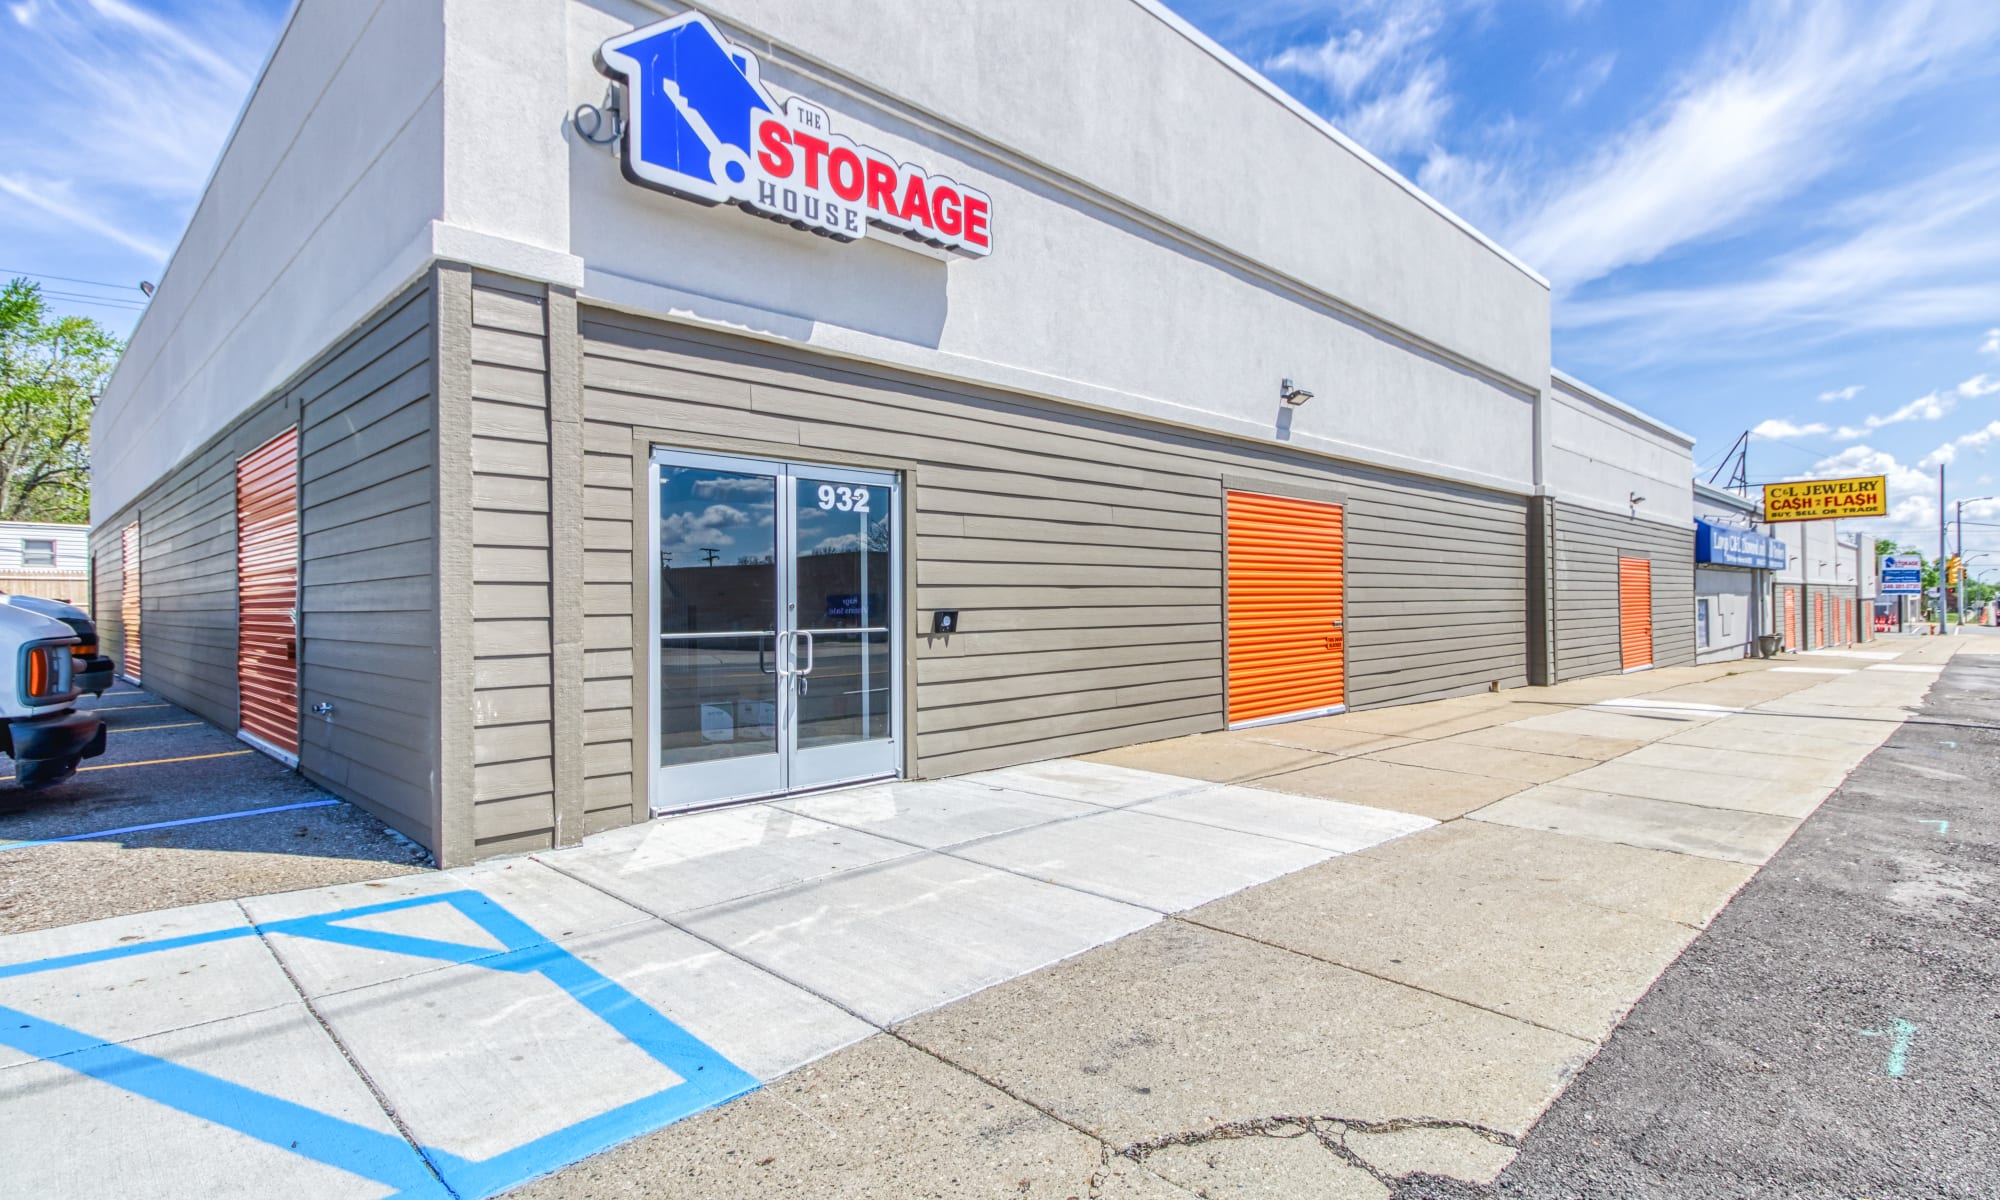 Self storage at The Storage House in Waterford Township, Michigan